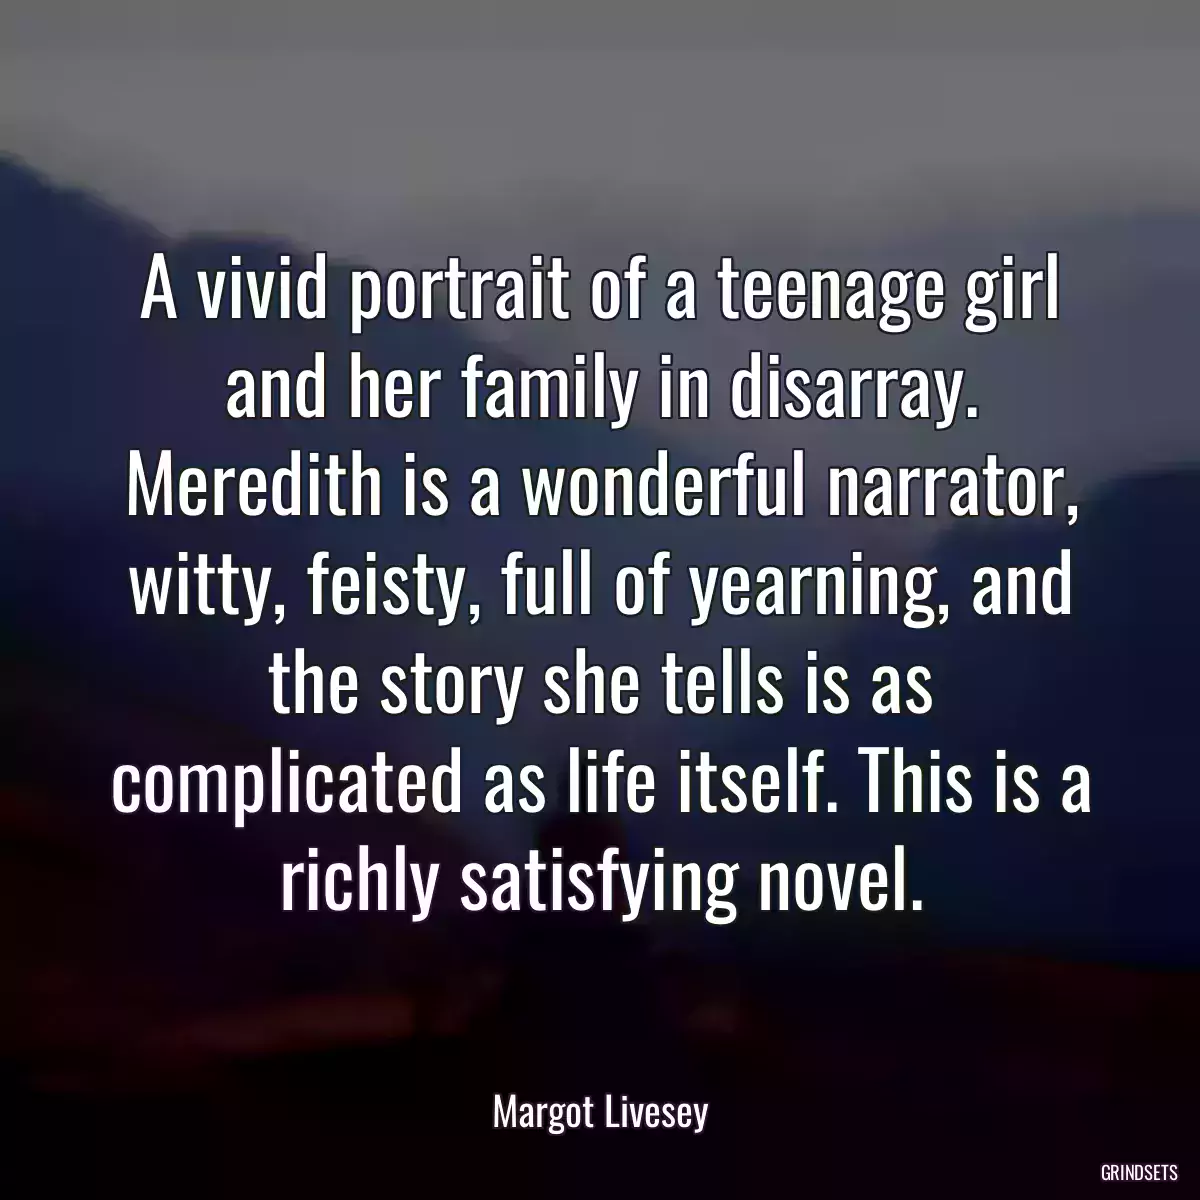 A vivid portrait of a teenage girl and her family in disarray. Meredith is a wonderful narrator, witty, feisty, full of yearning, and the story she tells is as complicated as life itself. This is a richly satisfying novel.